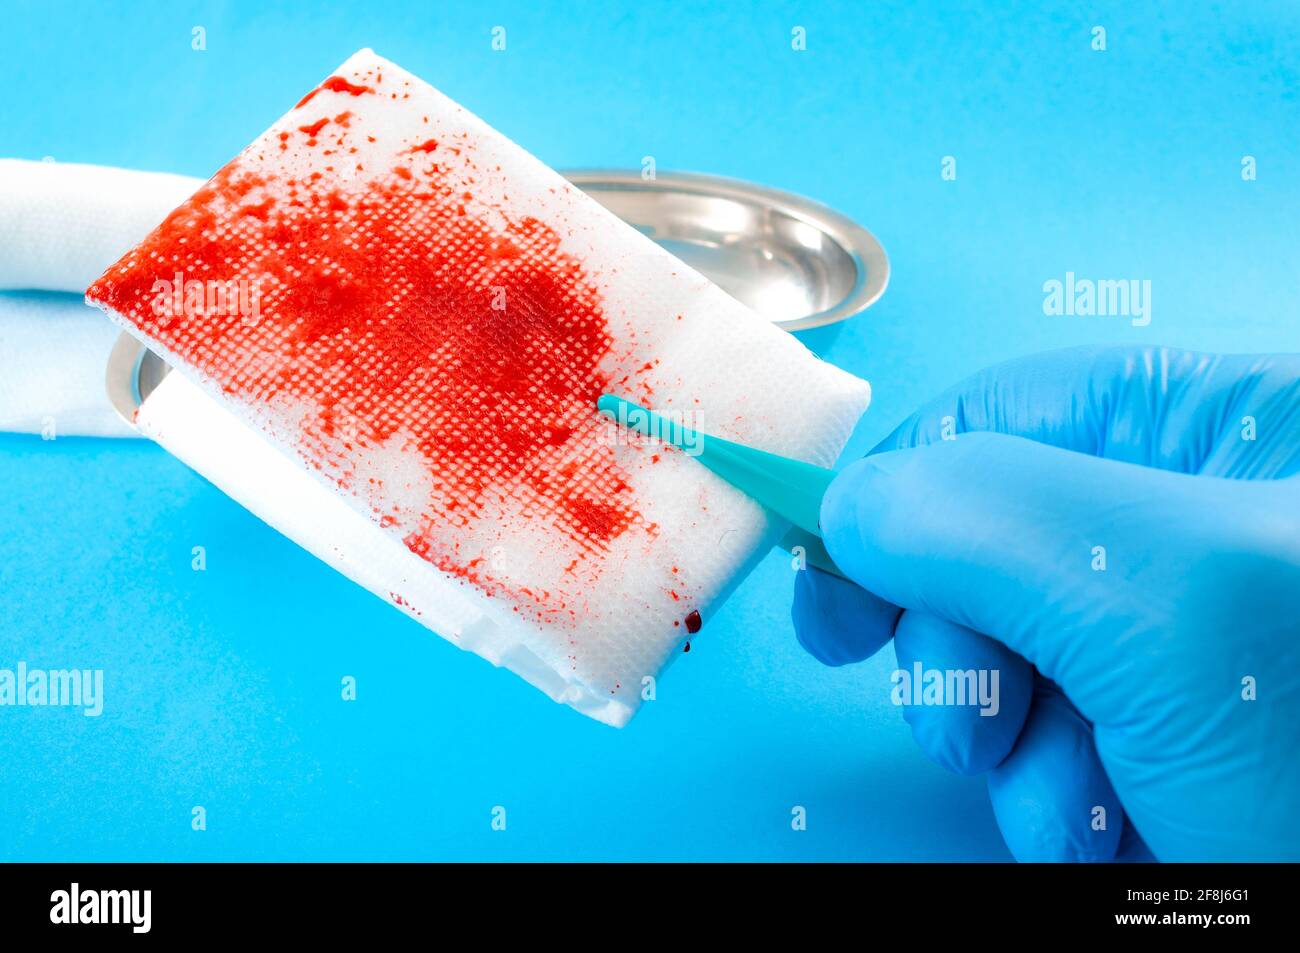 Surgery and first aid concept with a doctor holding tweezers and disposing of a dirty bandage soaked in blood, isolated on blue background with a kidn Stock Photo